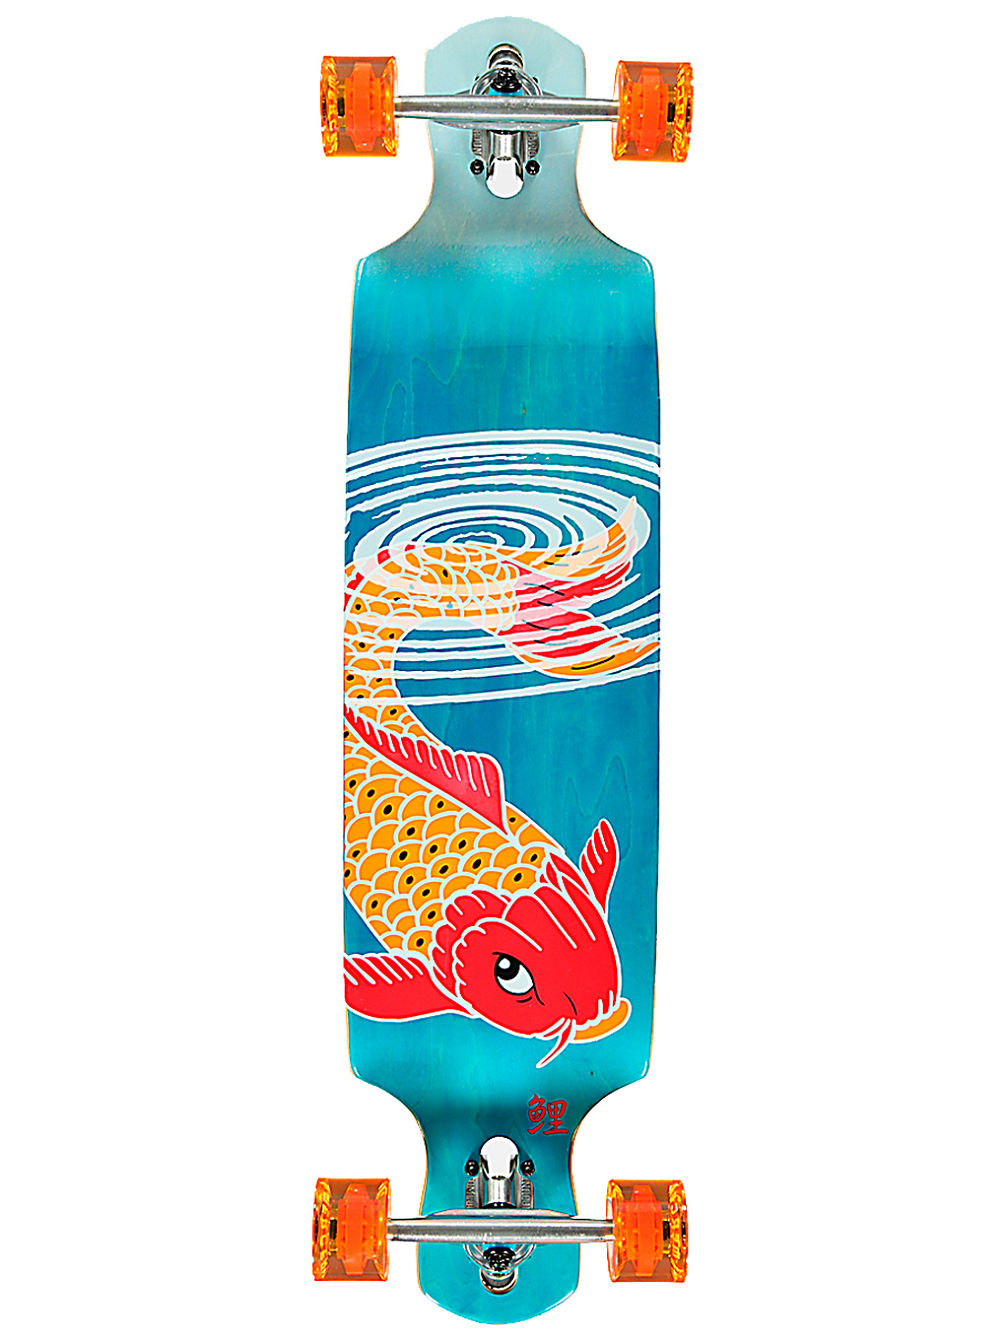 Koi Ripples Double Drop 40&amp;#034; Completo